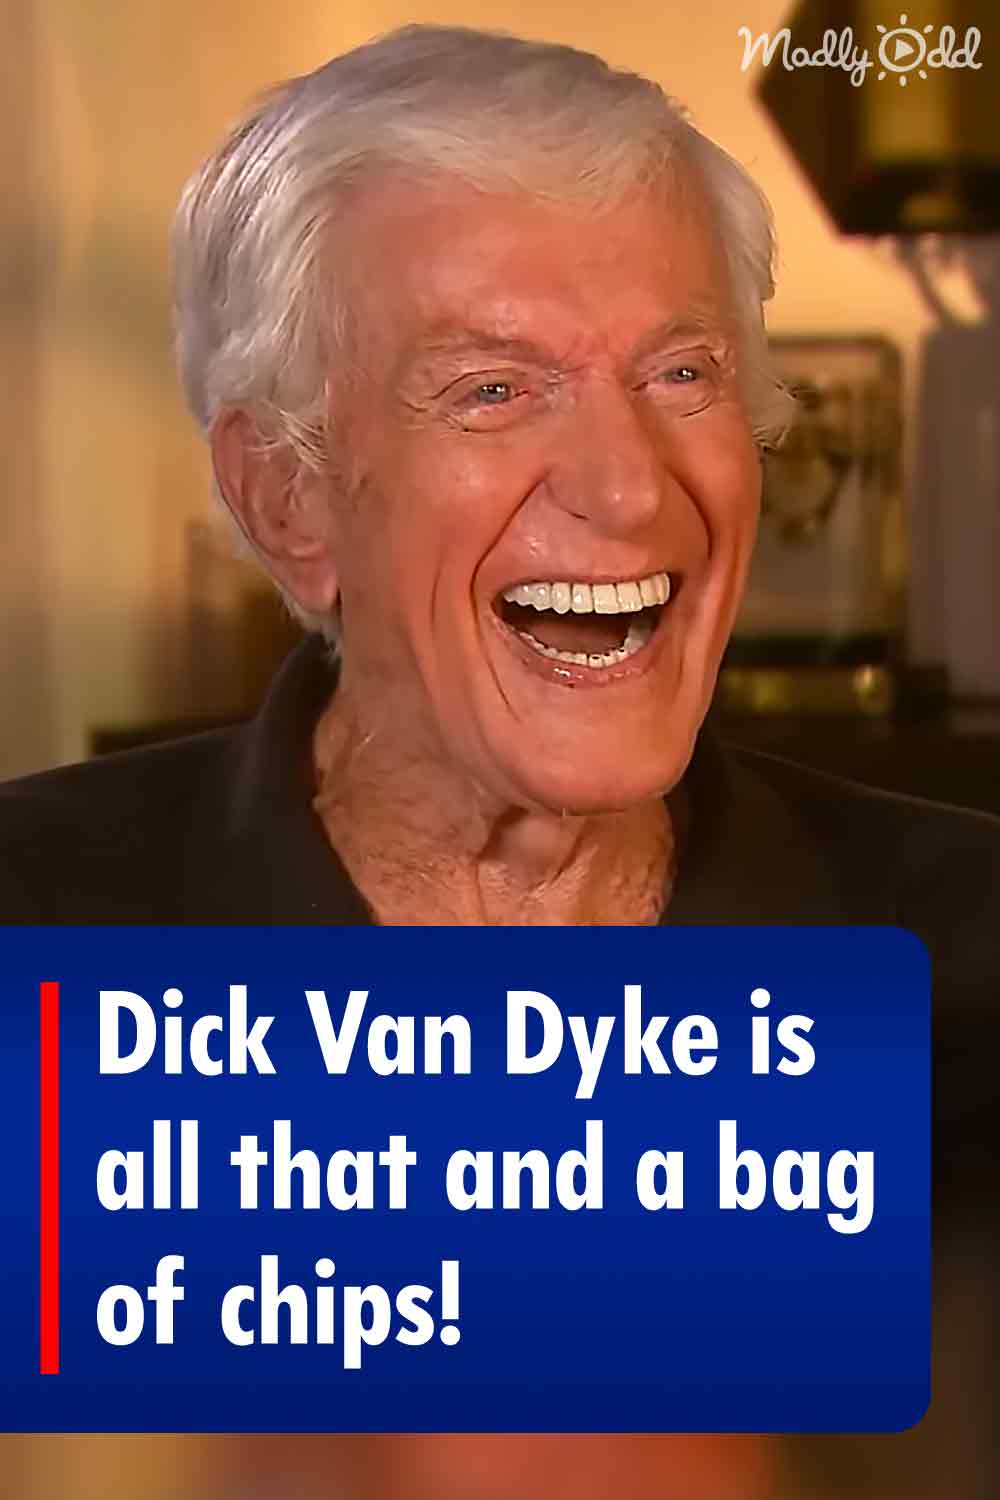 Dick Van Dyke is all that and a bag of chips!